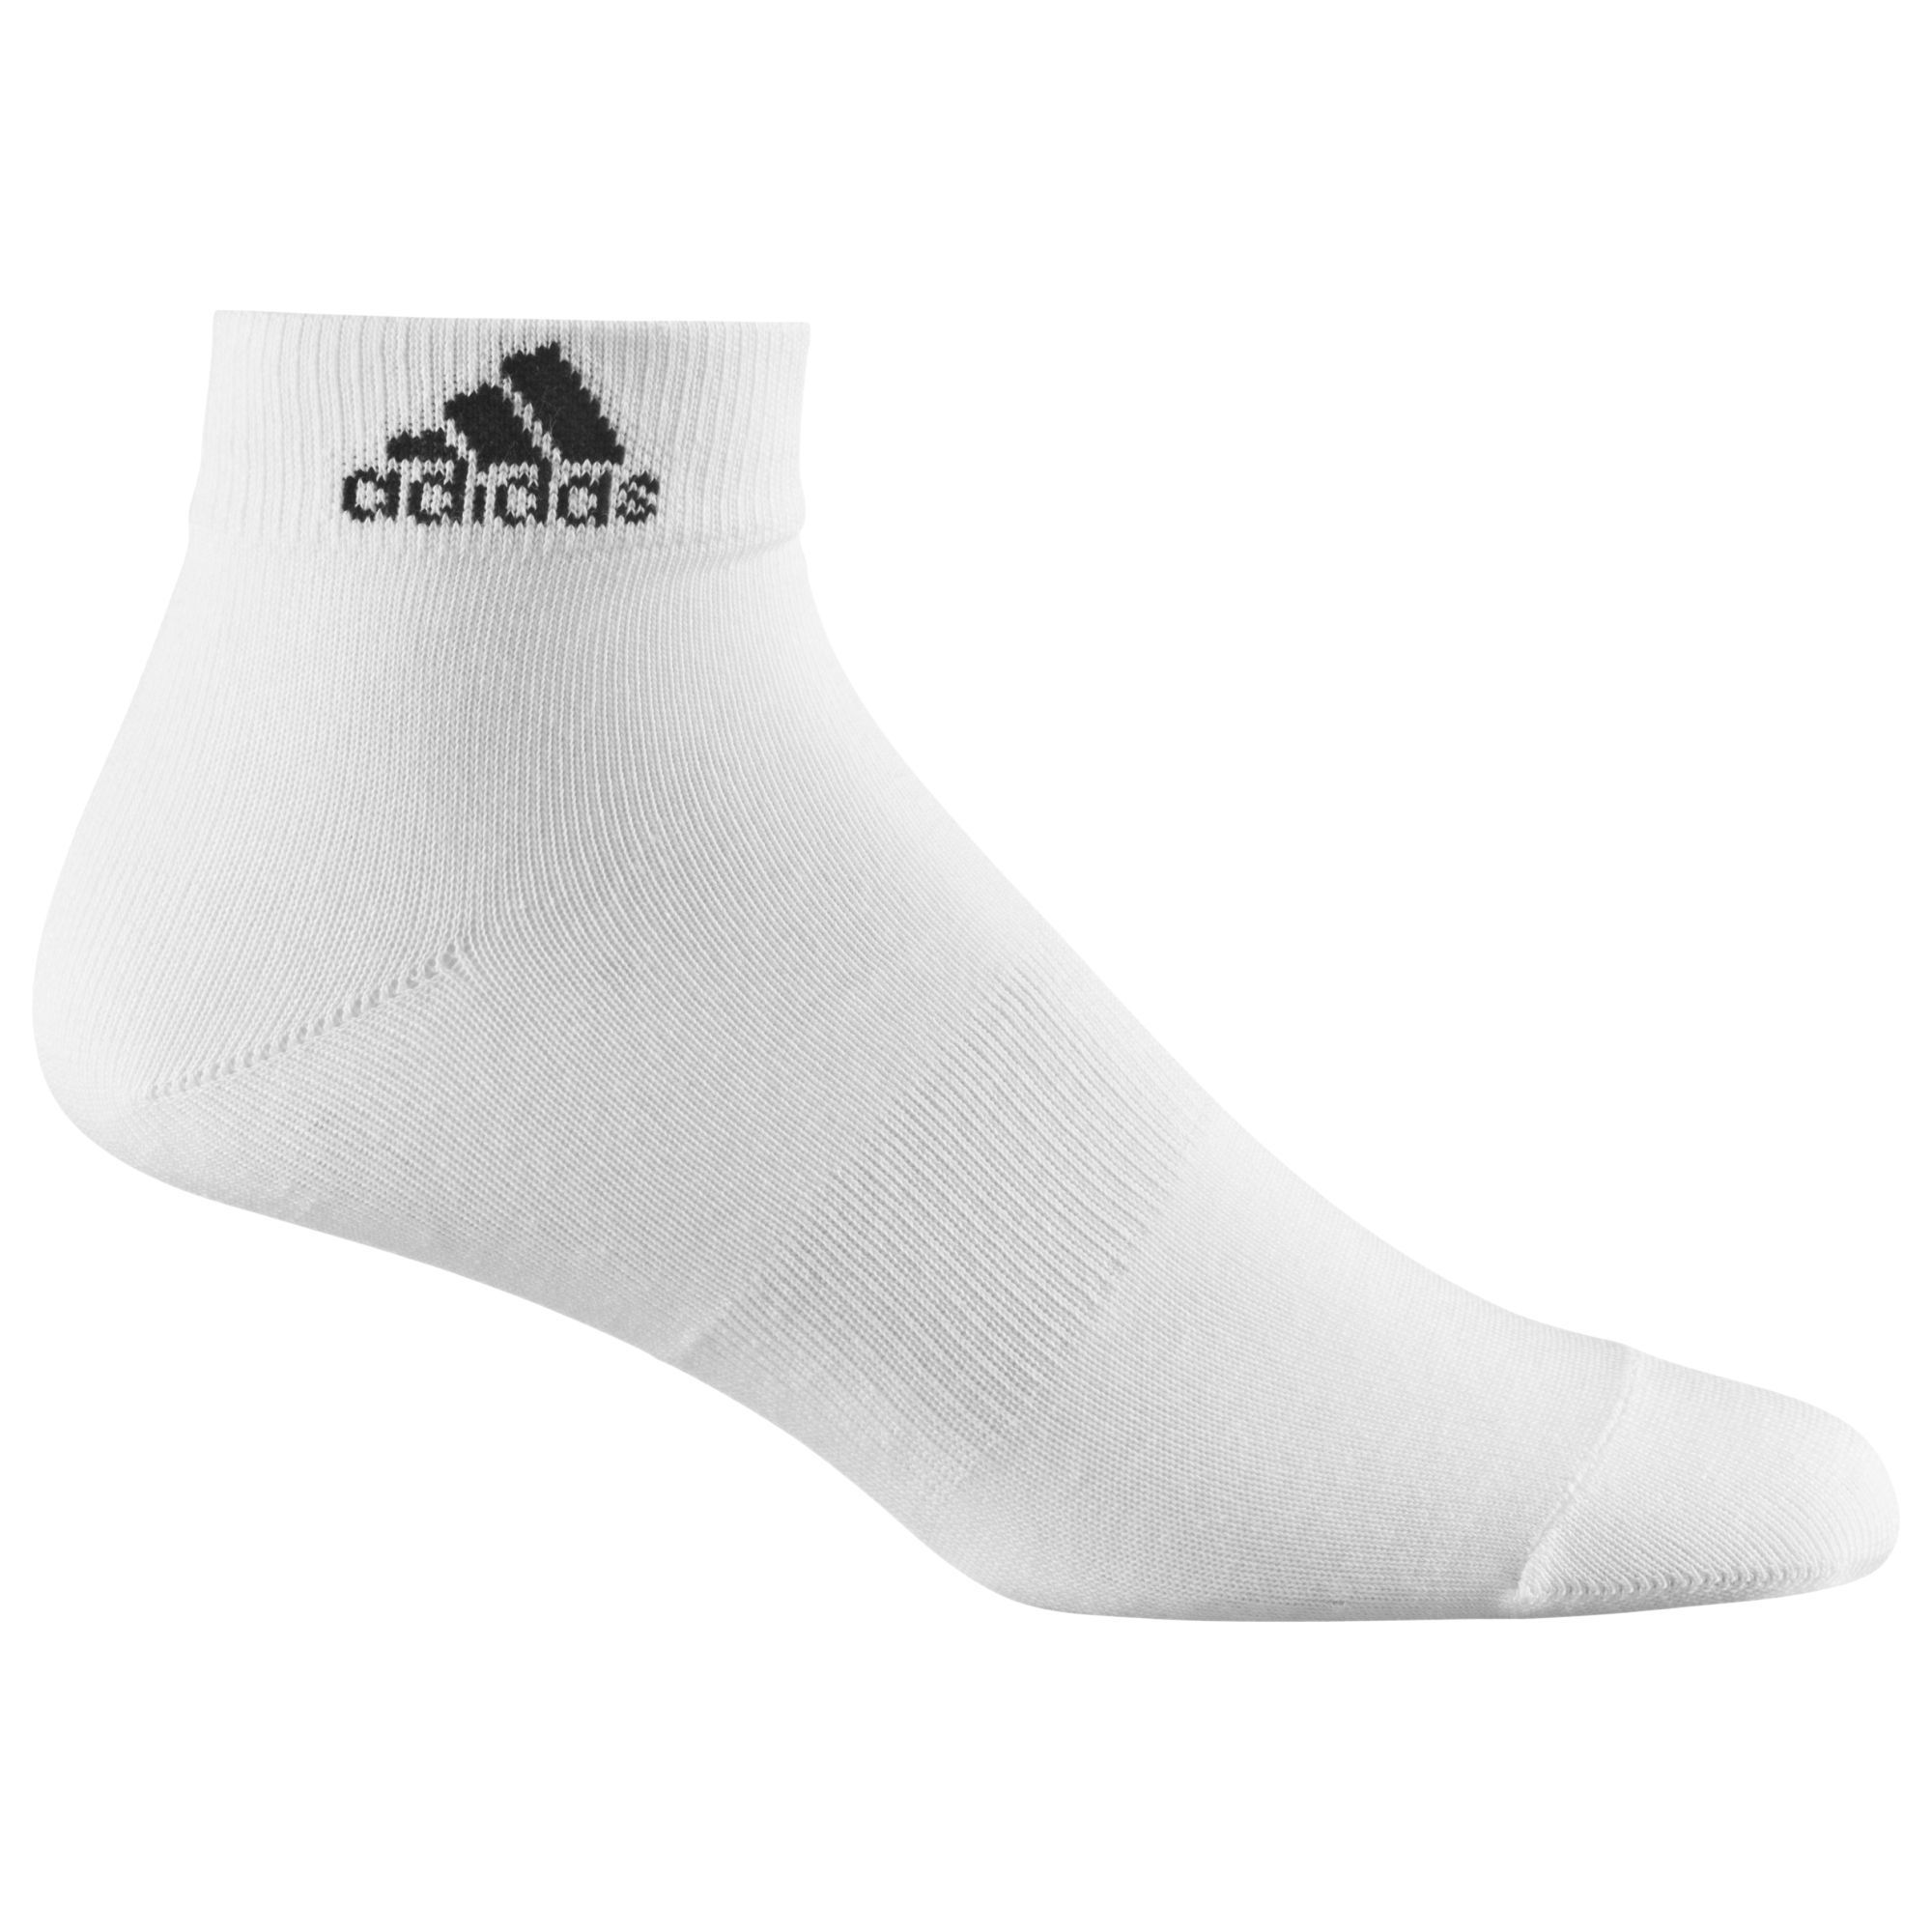  Adidas - VỚ thể thao   ACCESSORIES N EC ANKLE W52568 (Trắng) 